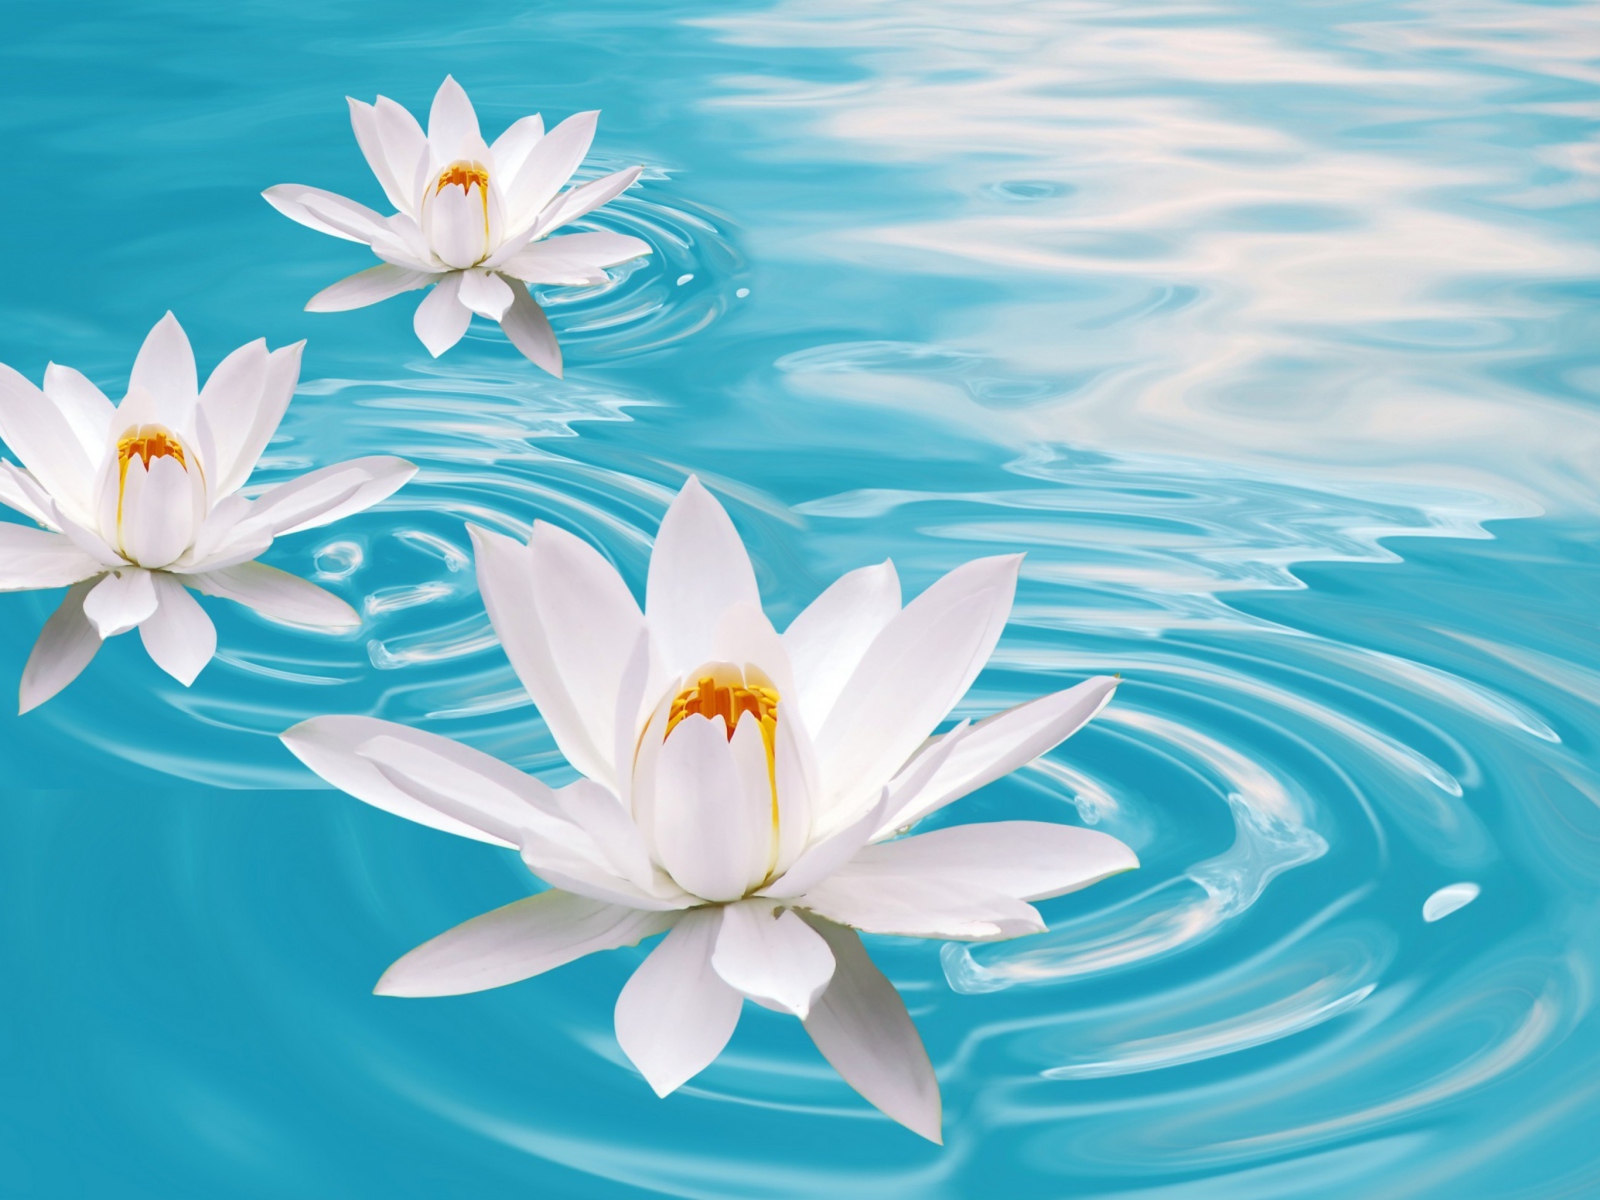 White Lilies And Blue Water wallpaper 1600x1200